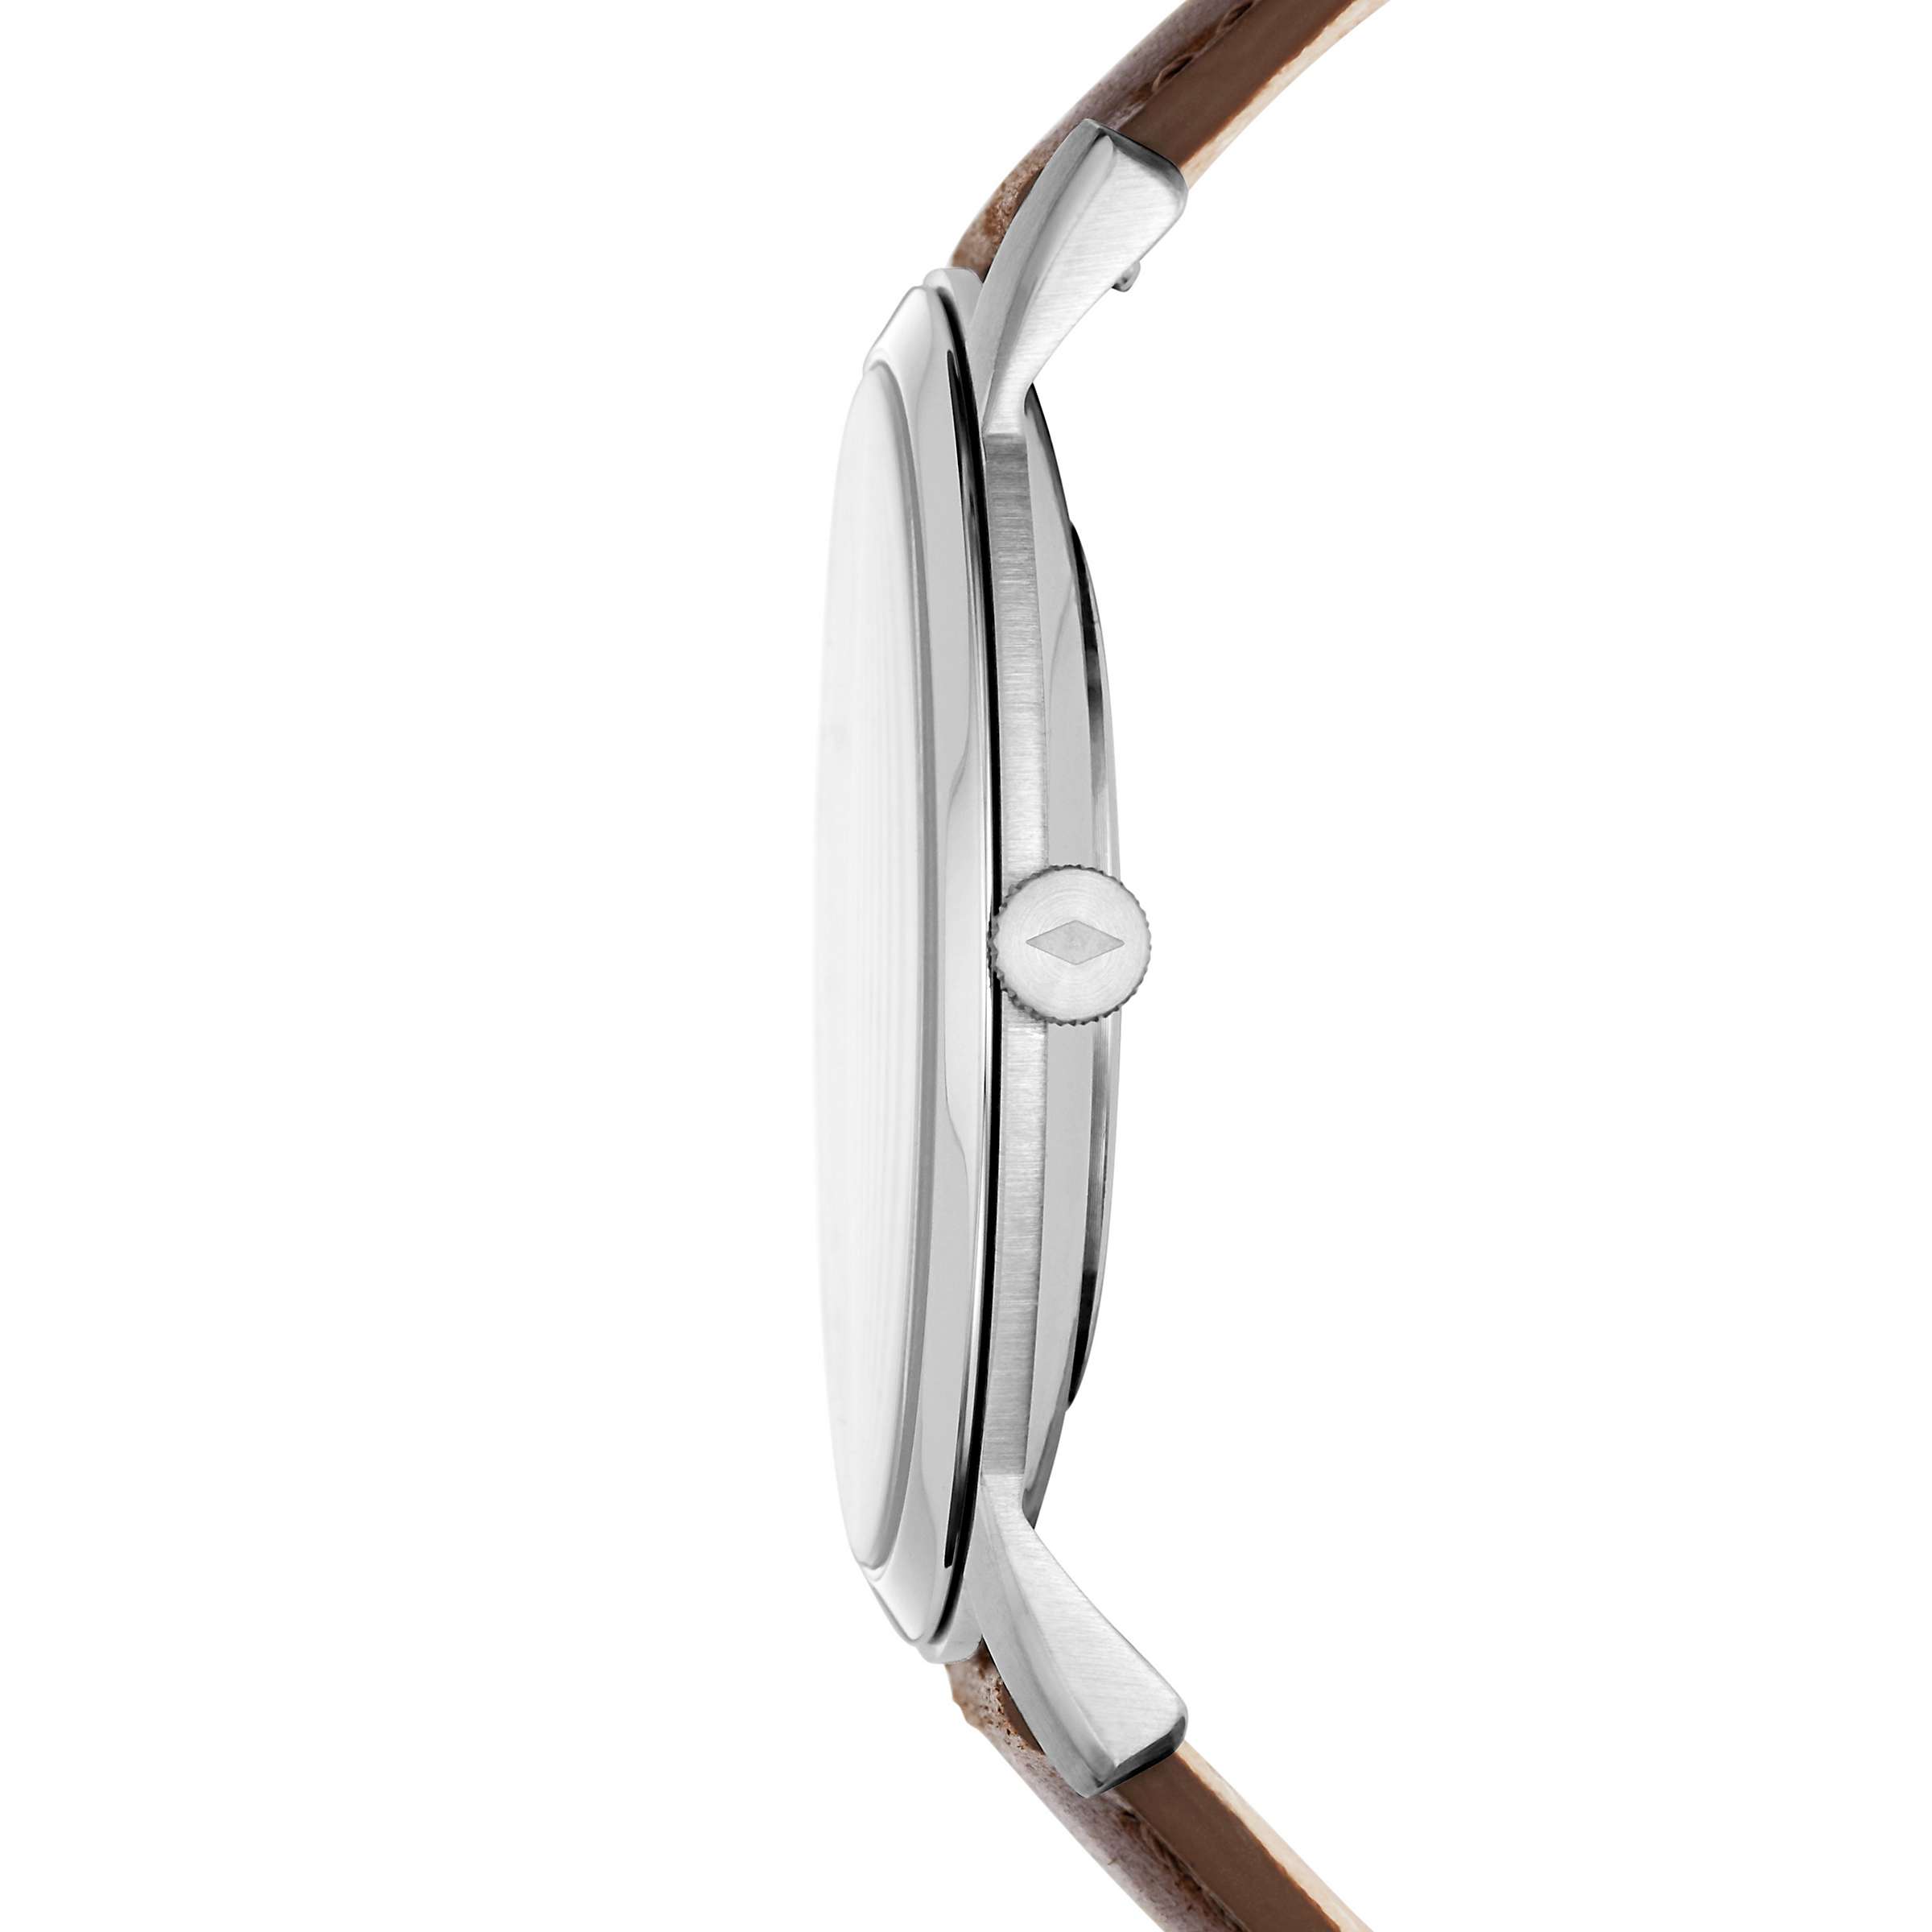 Buy Fossil Men's Minimalist Leather Strap Watch, Brown/White FS5439 Online at johnlewis.com